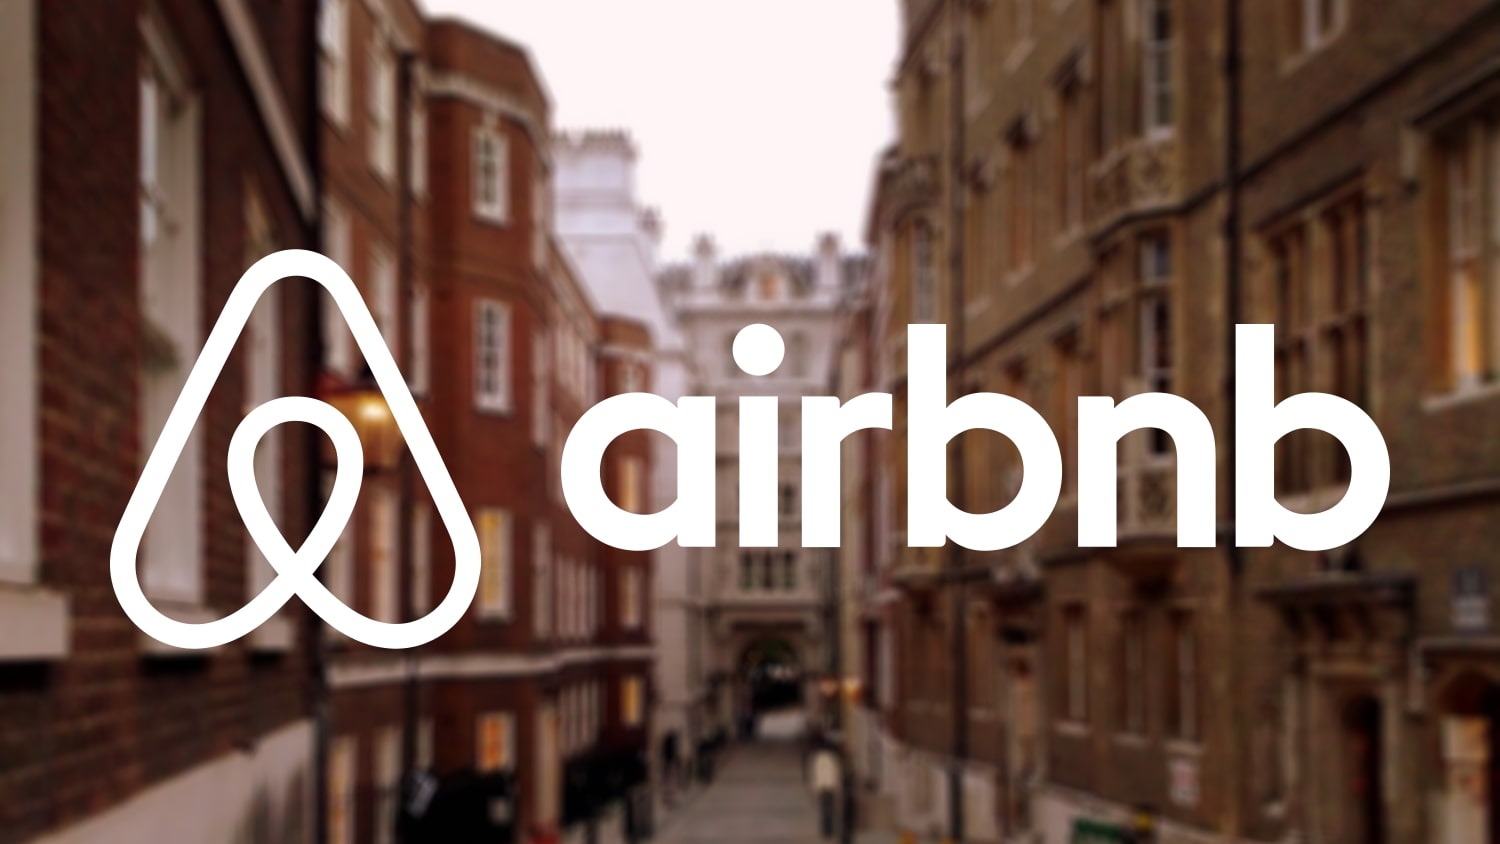 An example of B2C service marketing: Airbnb